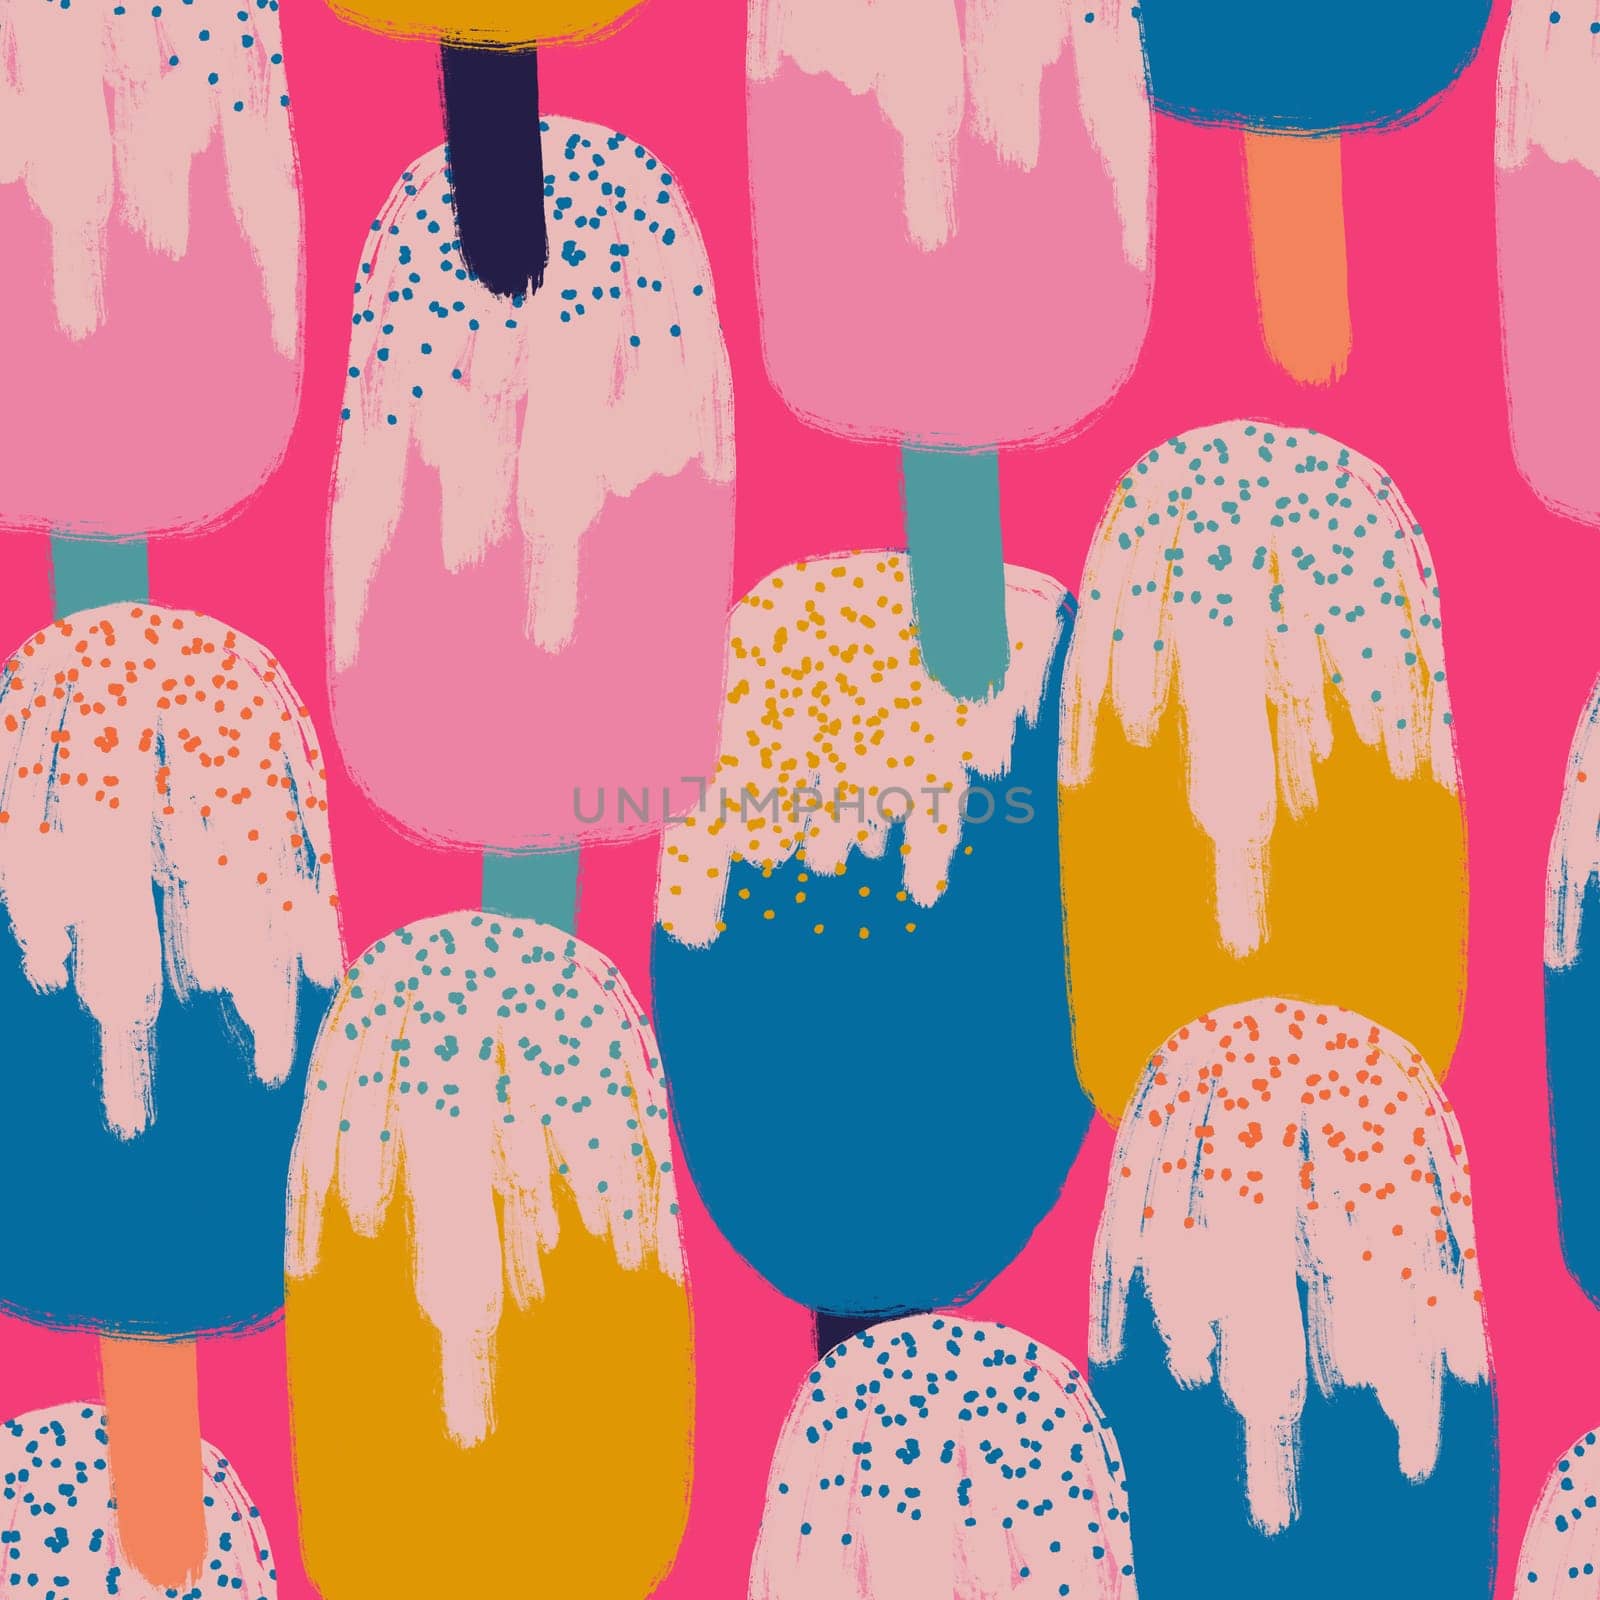 Hand drawn seamless pattern with ice cream popsicle sweet food. Pink yellow green on hot hyper pink background. Summer colorful print with frozen tasty dessert, doodle funny style, whte chocolate glaze